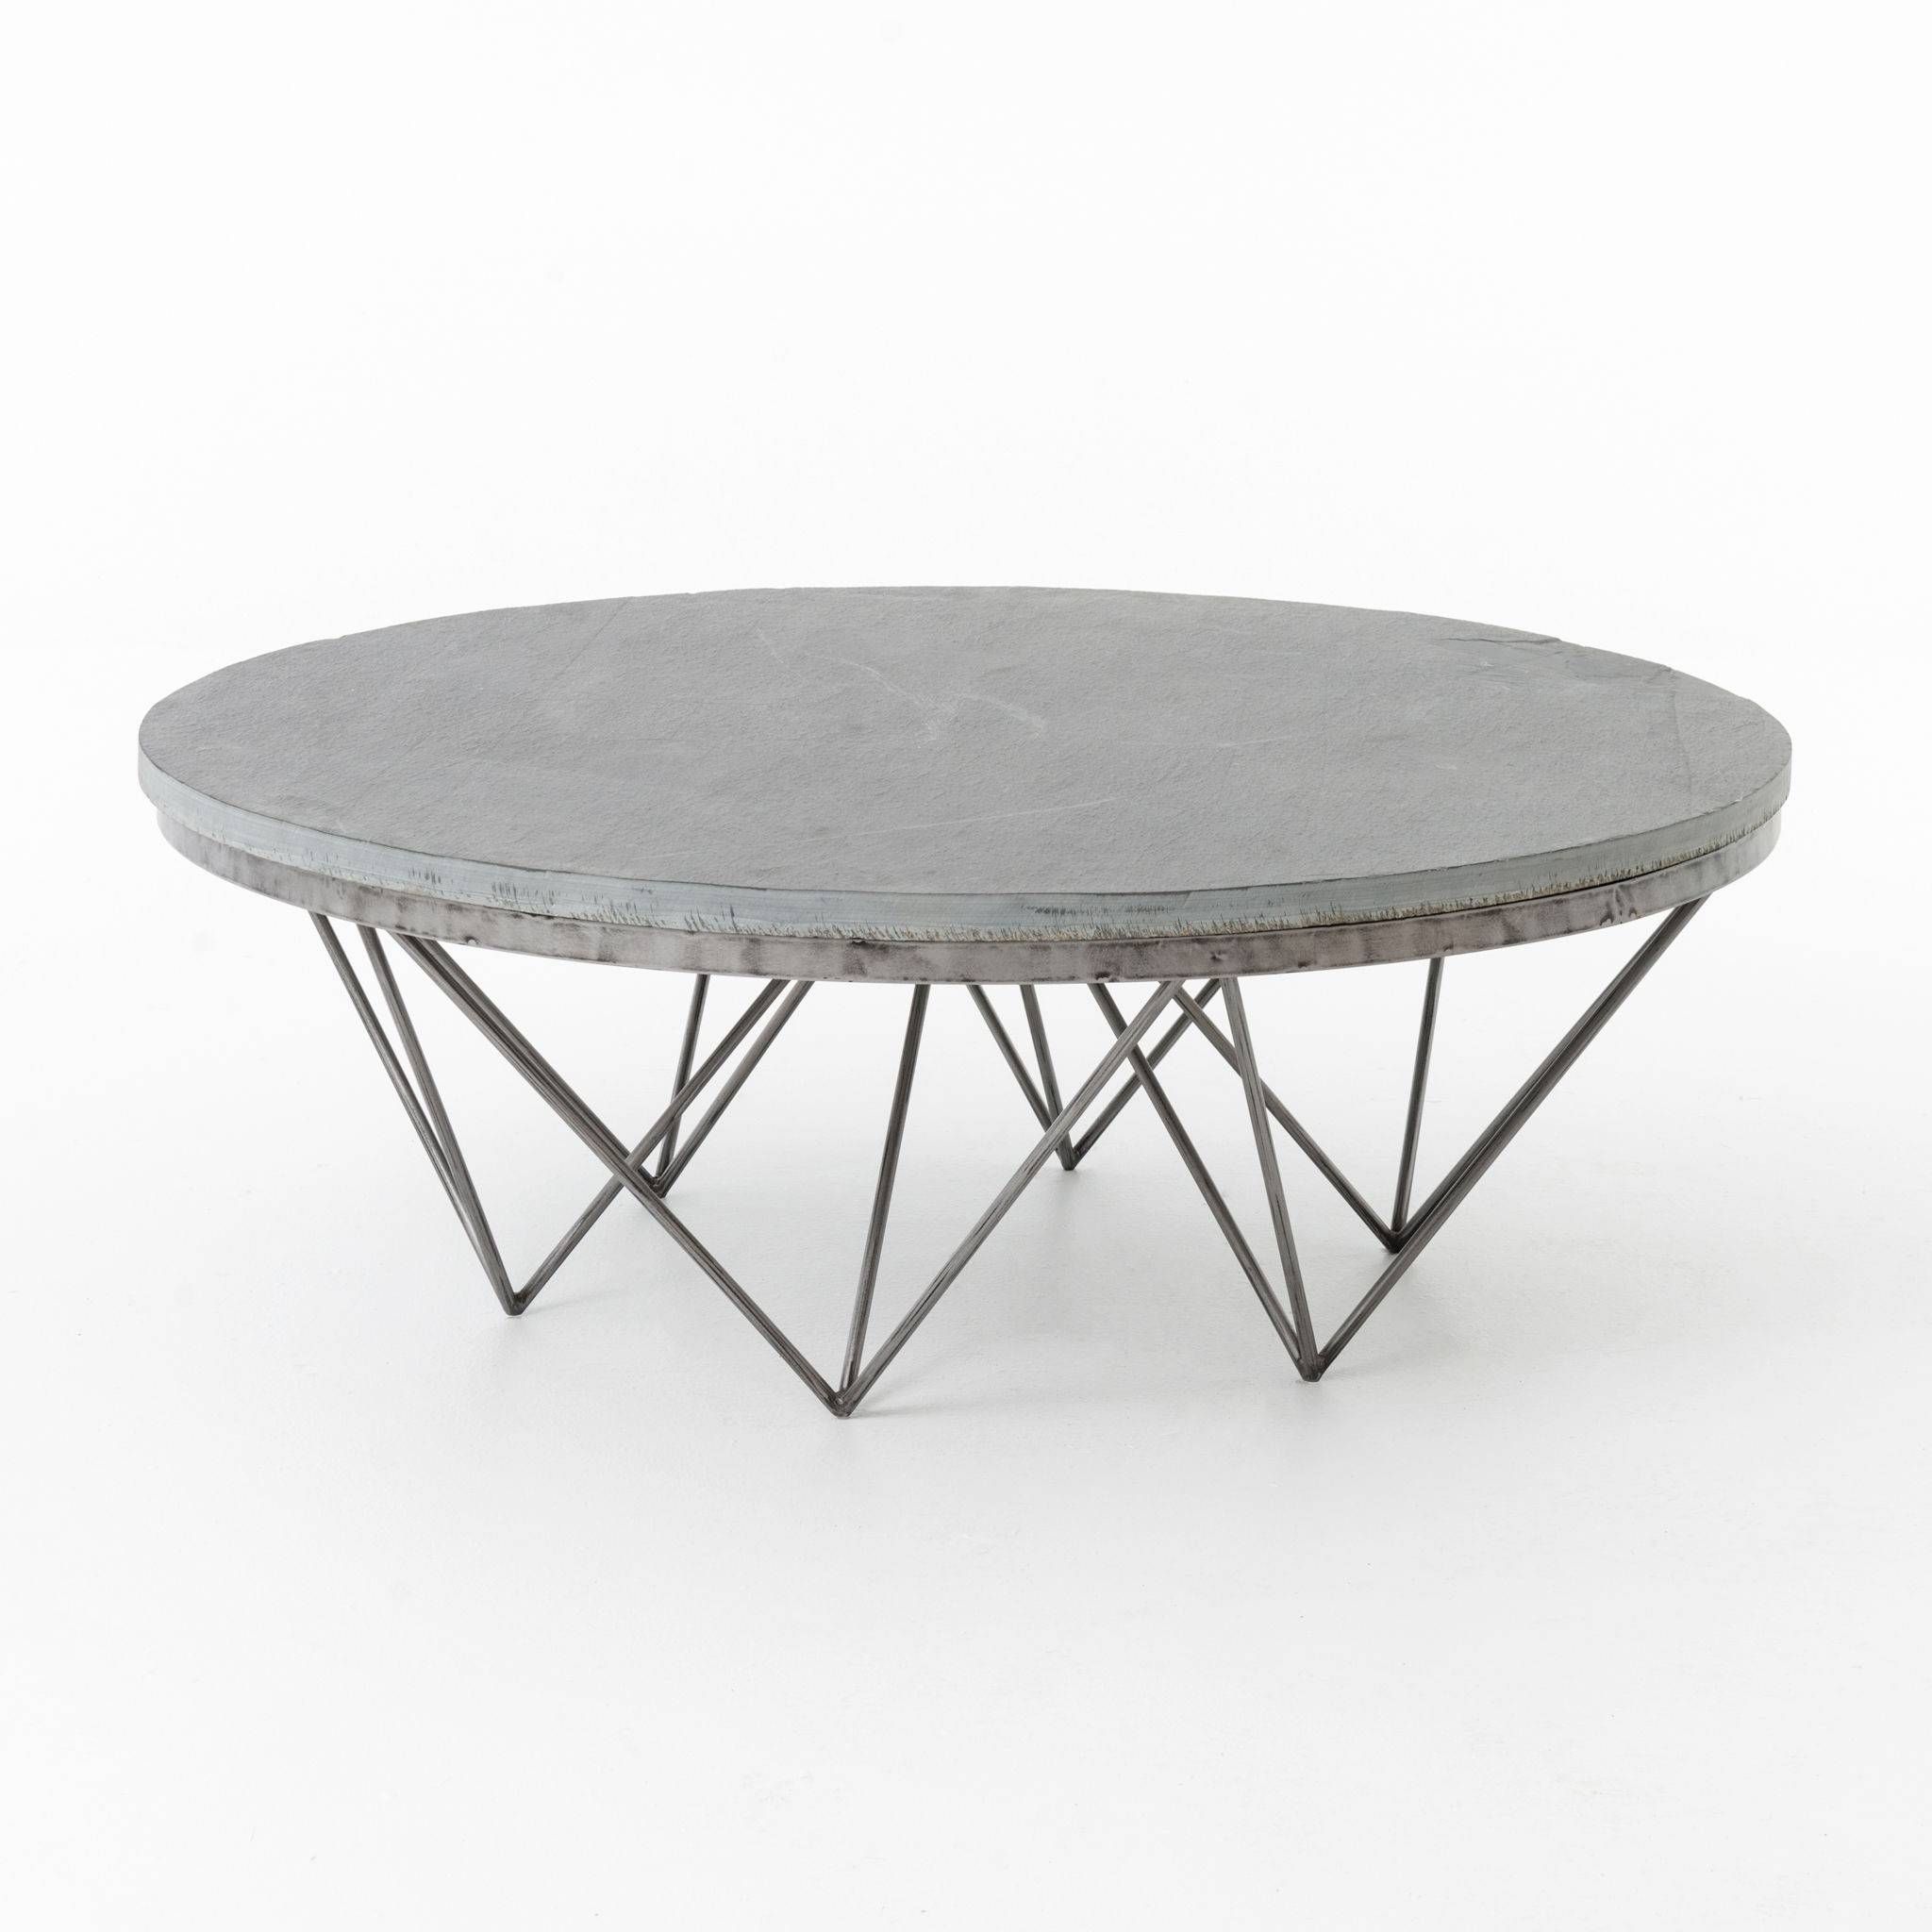 Mohena Wood And Leather Circular Coffee Table Birdsu0027 Tooled Pertaining To Quality Coffee Tables (View 10 of 30)